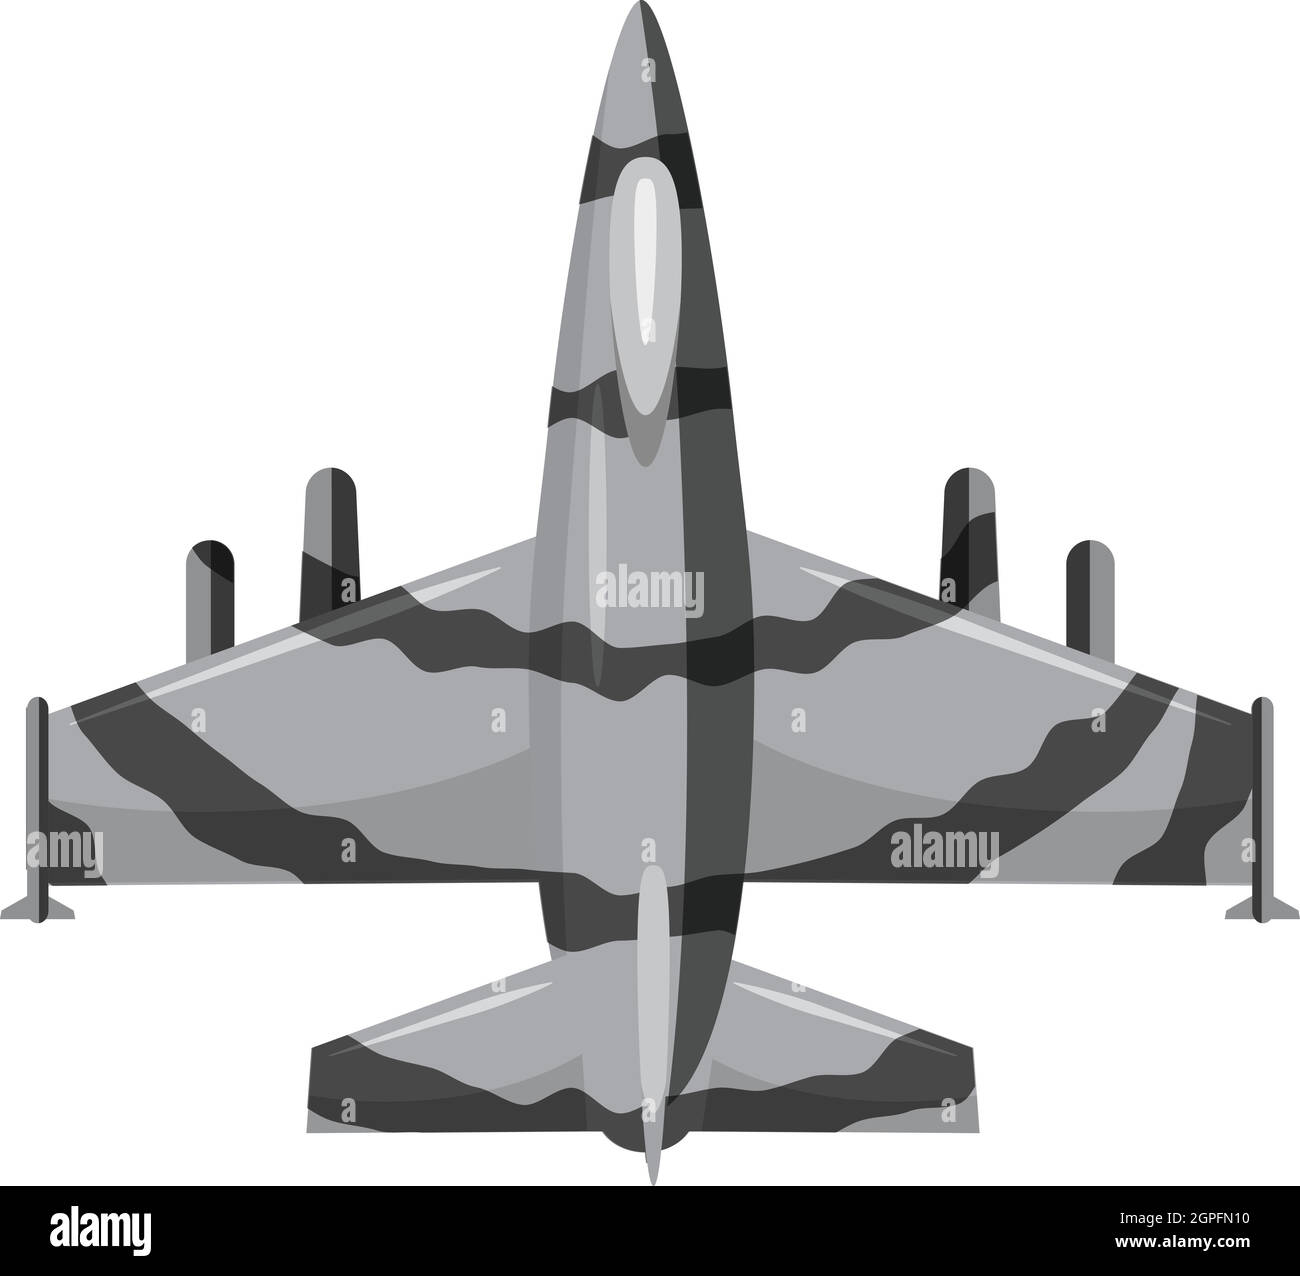 Military aircraft icon, gray monochrome style Stock Vector